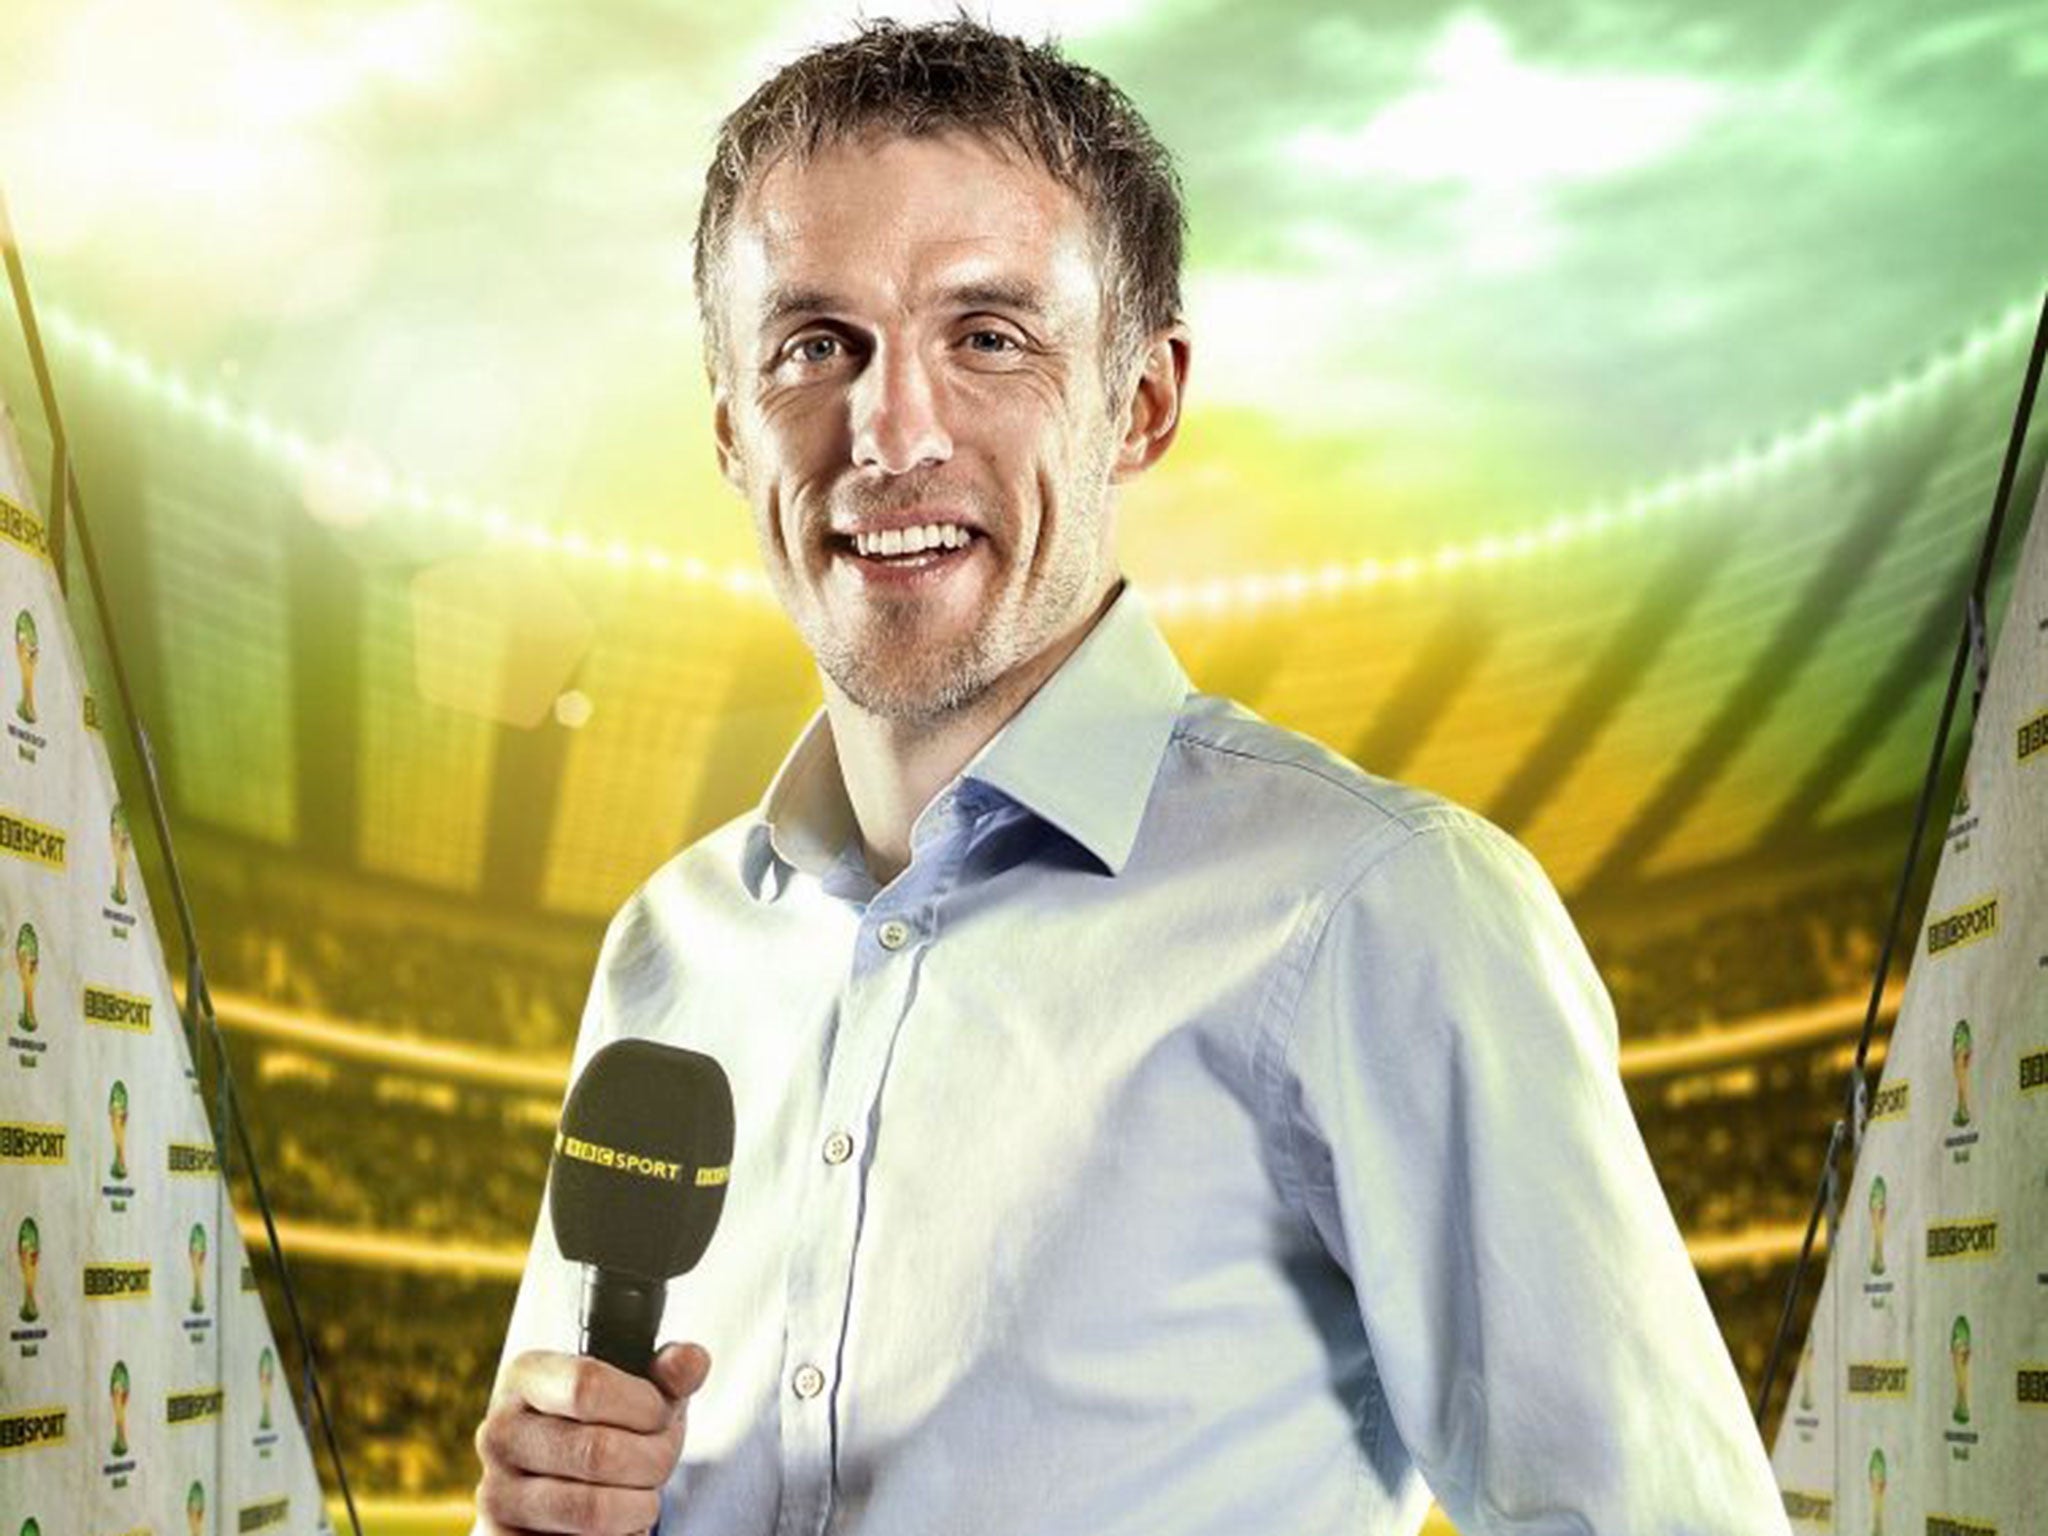 BBC pundit Phil Neville was roundly criticised for his commentary last week